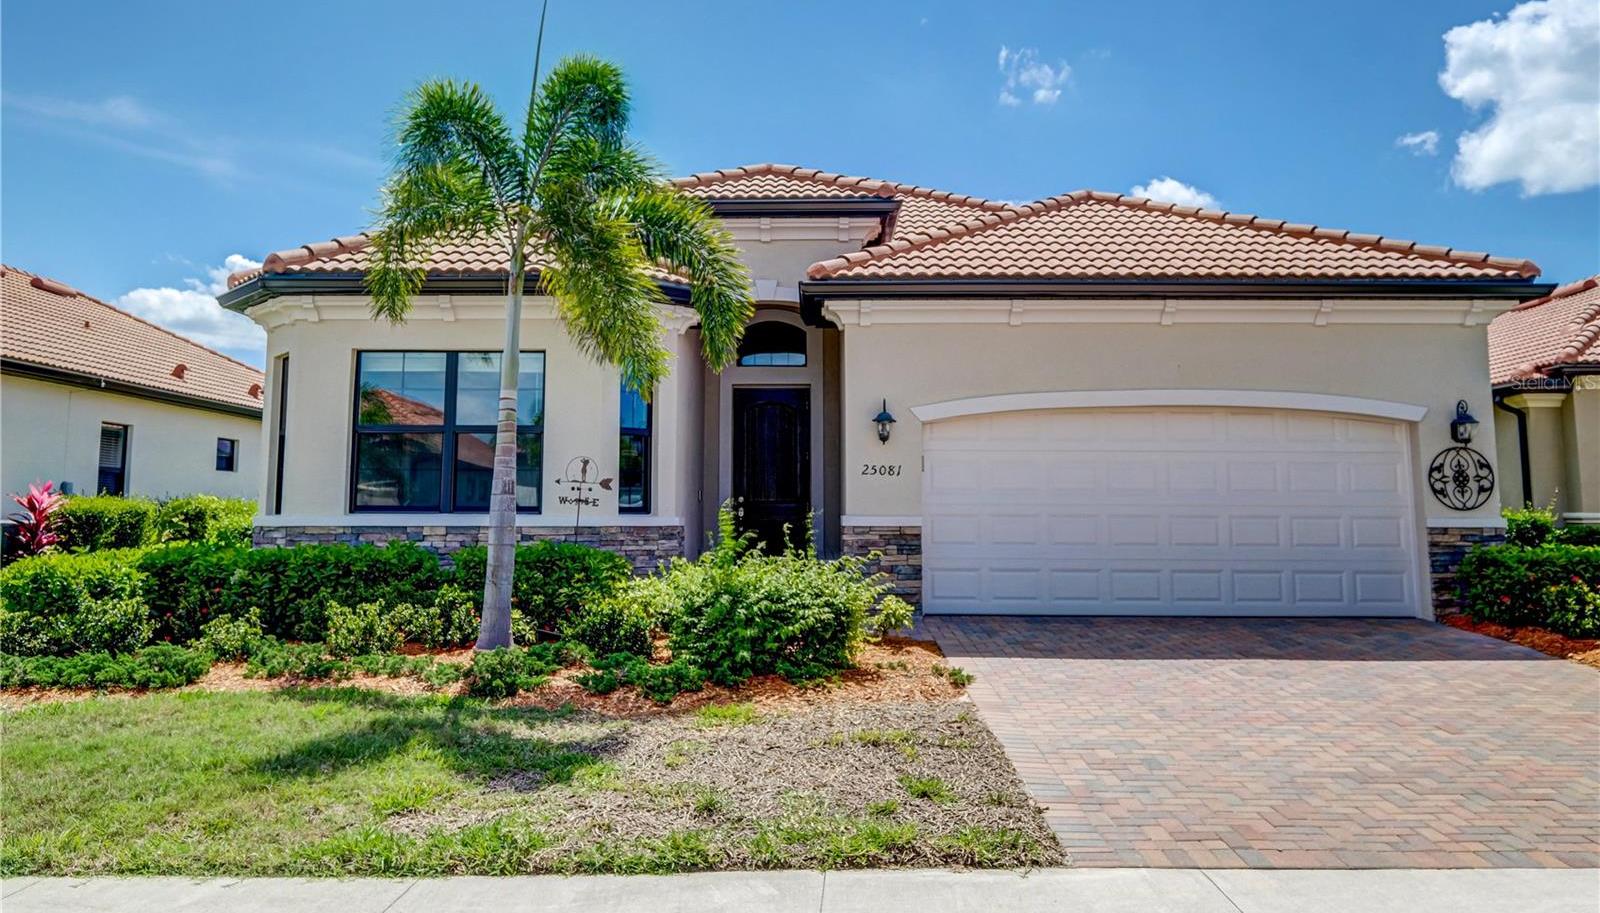 Photo one of 25081 Spartina Dr Venice FL 34293 | MLS A4603558